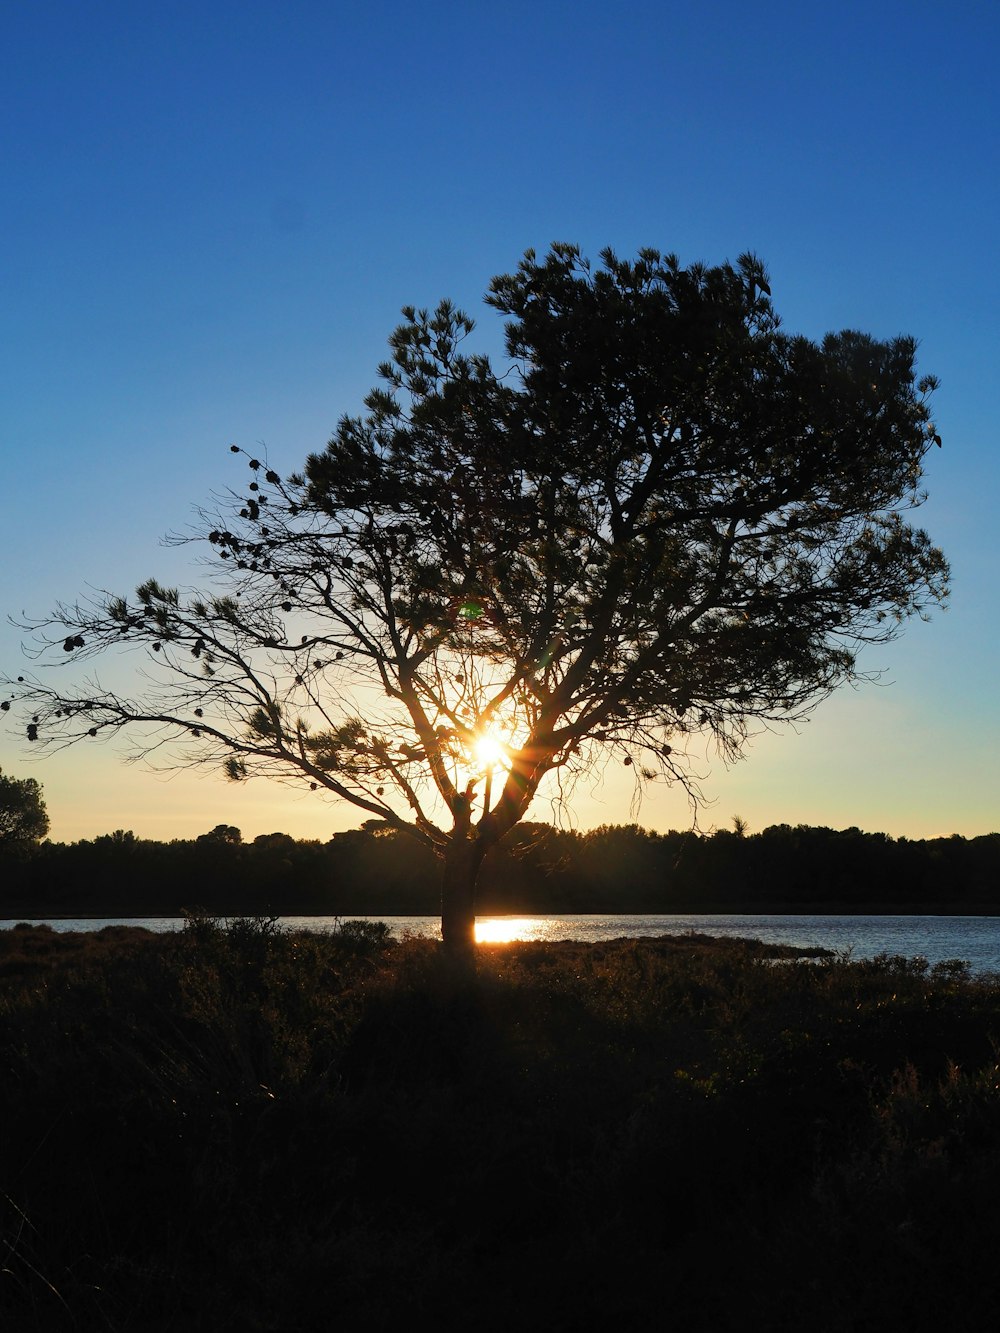 the sun is setting behind a tree near a body of water